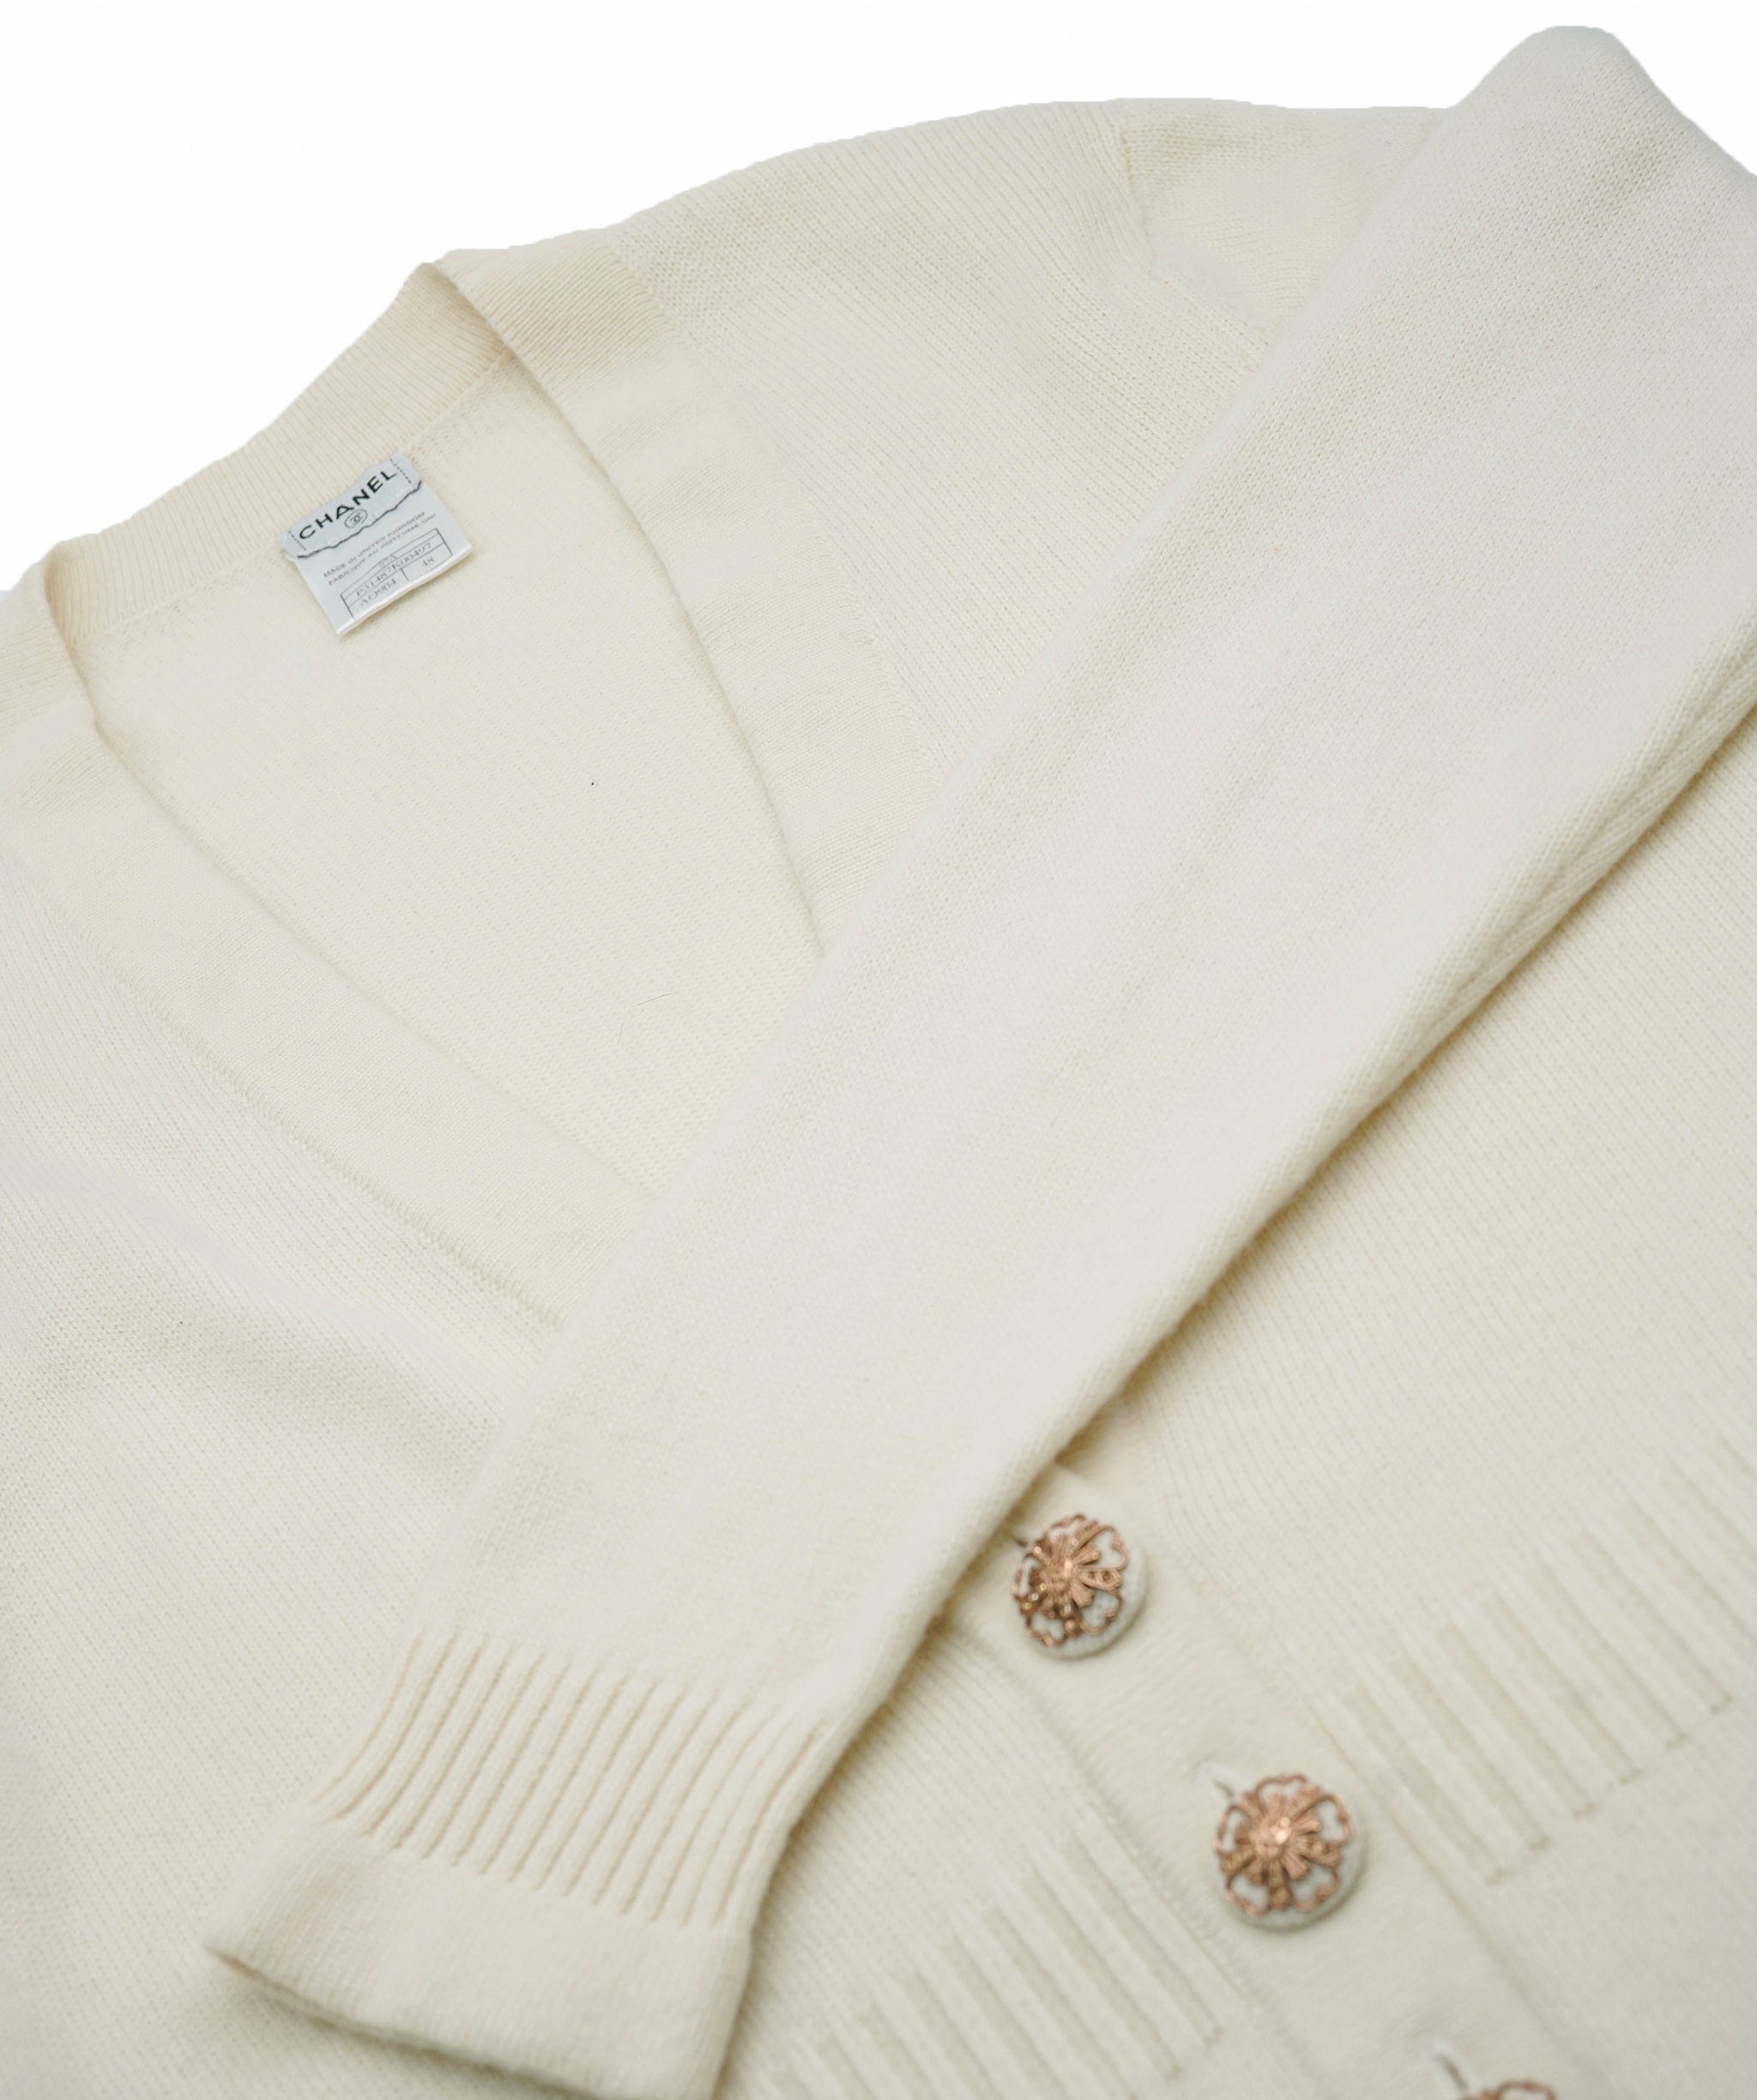 Chanel Chanel off white cashmere cardigan - AWL4172